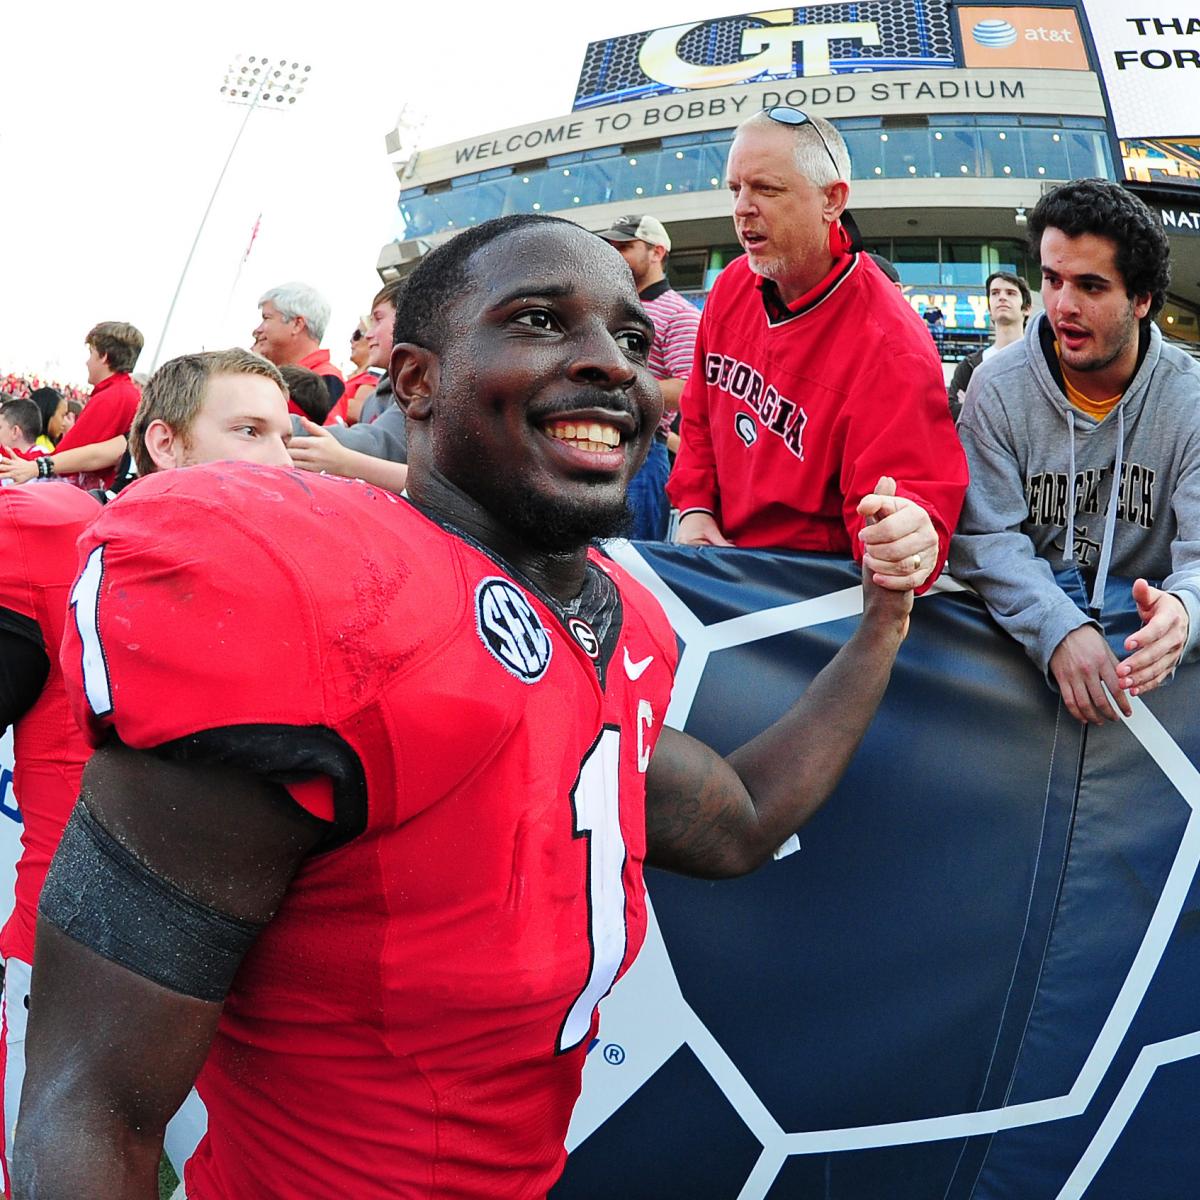 Sony Michel Injury: Updates on Georgia RB's Arm and Recovery